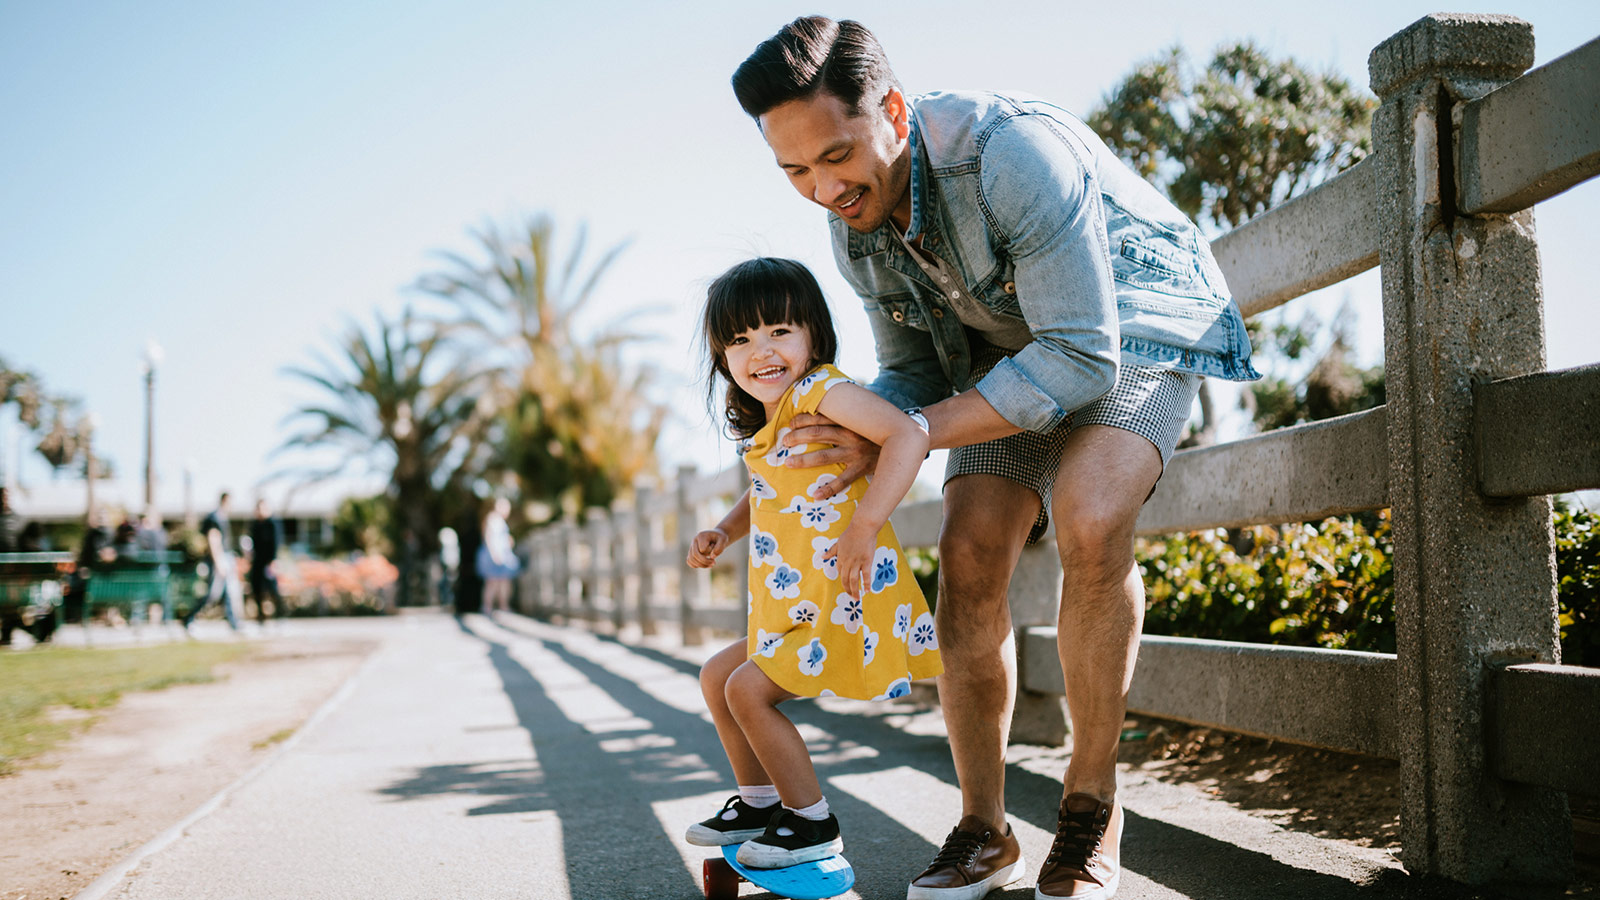 Dad and daughter skateboarding